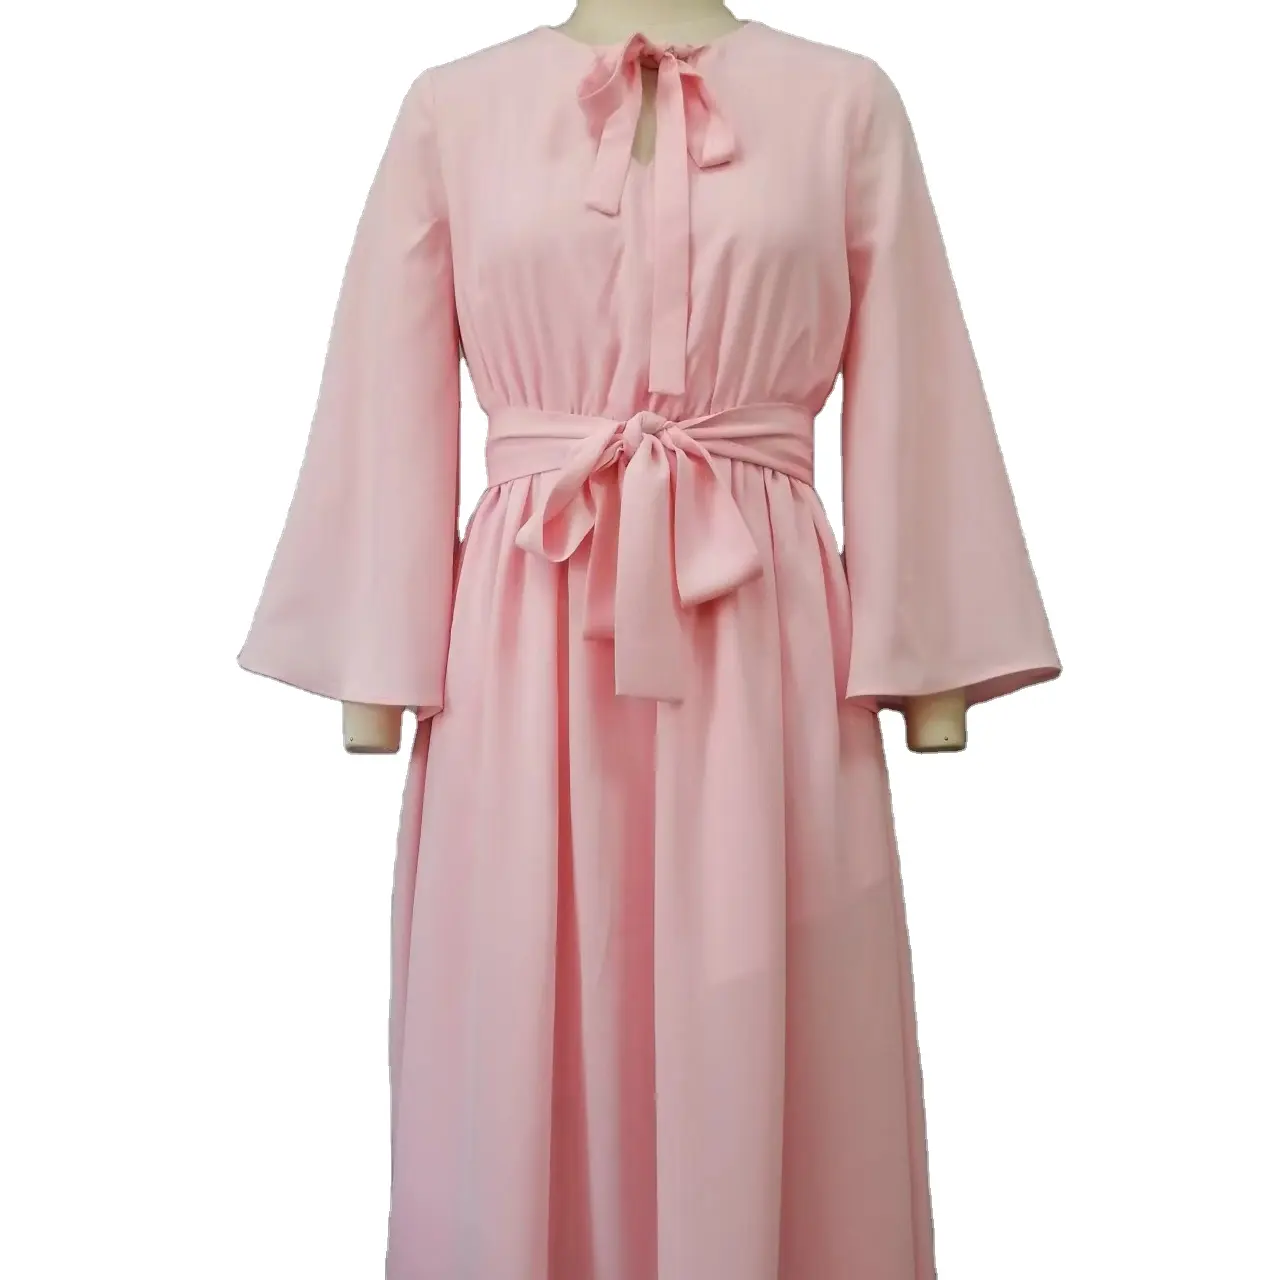 New Ladies Beautiful Maxi Pink Dress With Long Sleeves And Sash Muslin Dress Women Fashion Sweet Dresses With High Fashion